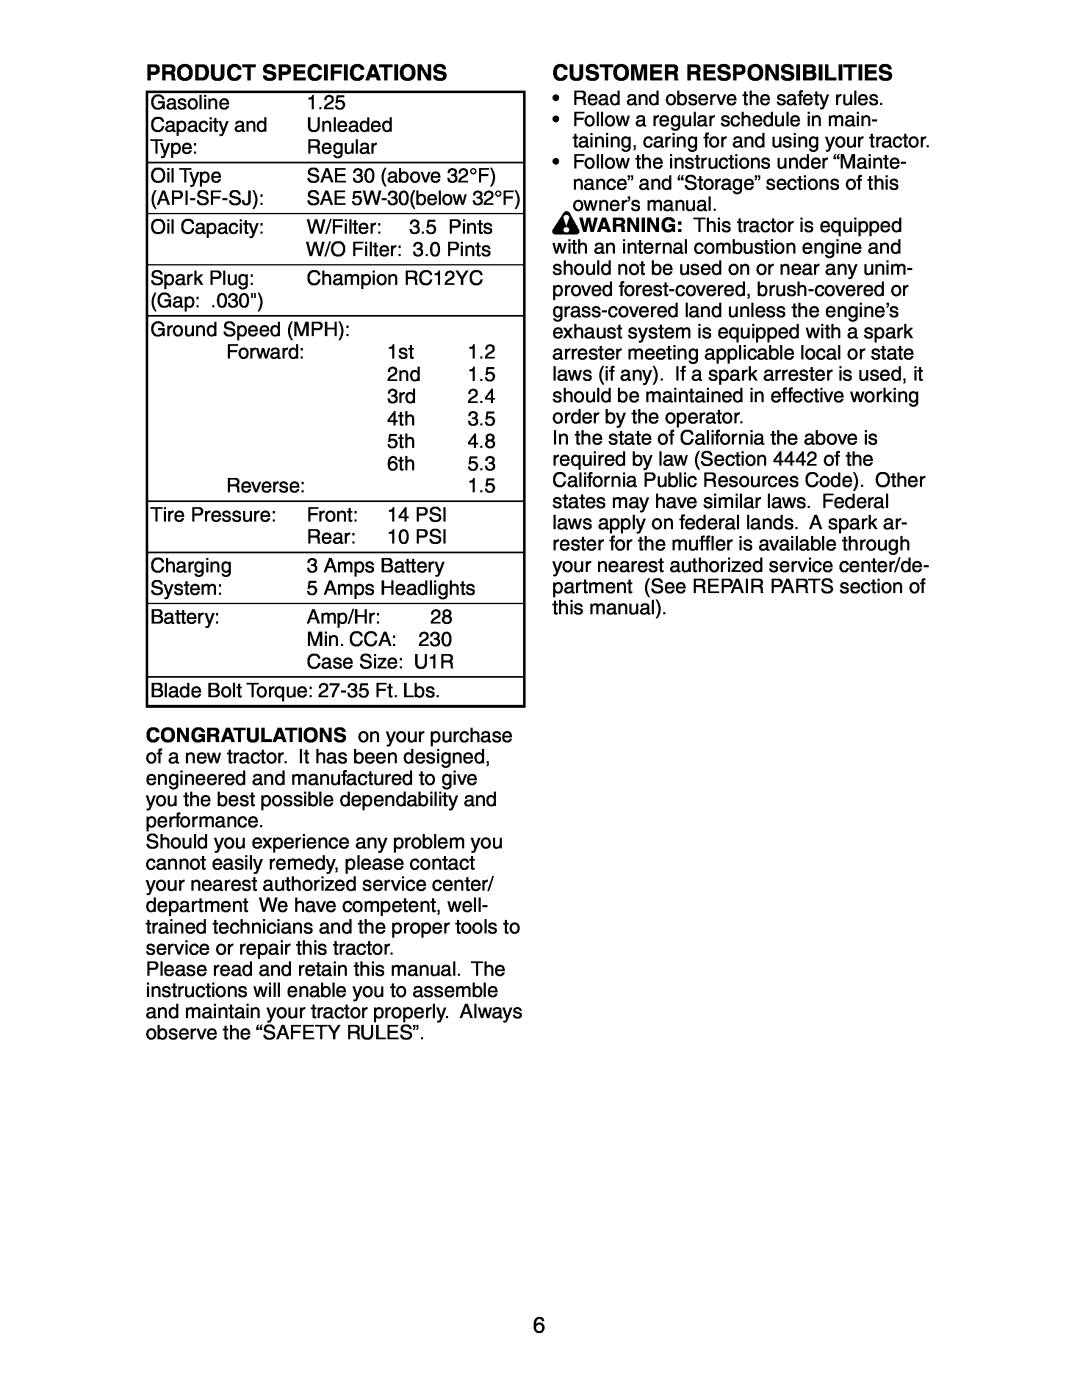 Poulan CO1842STA manual Product Specifications, Customer Responsibilities 